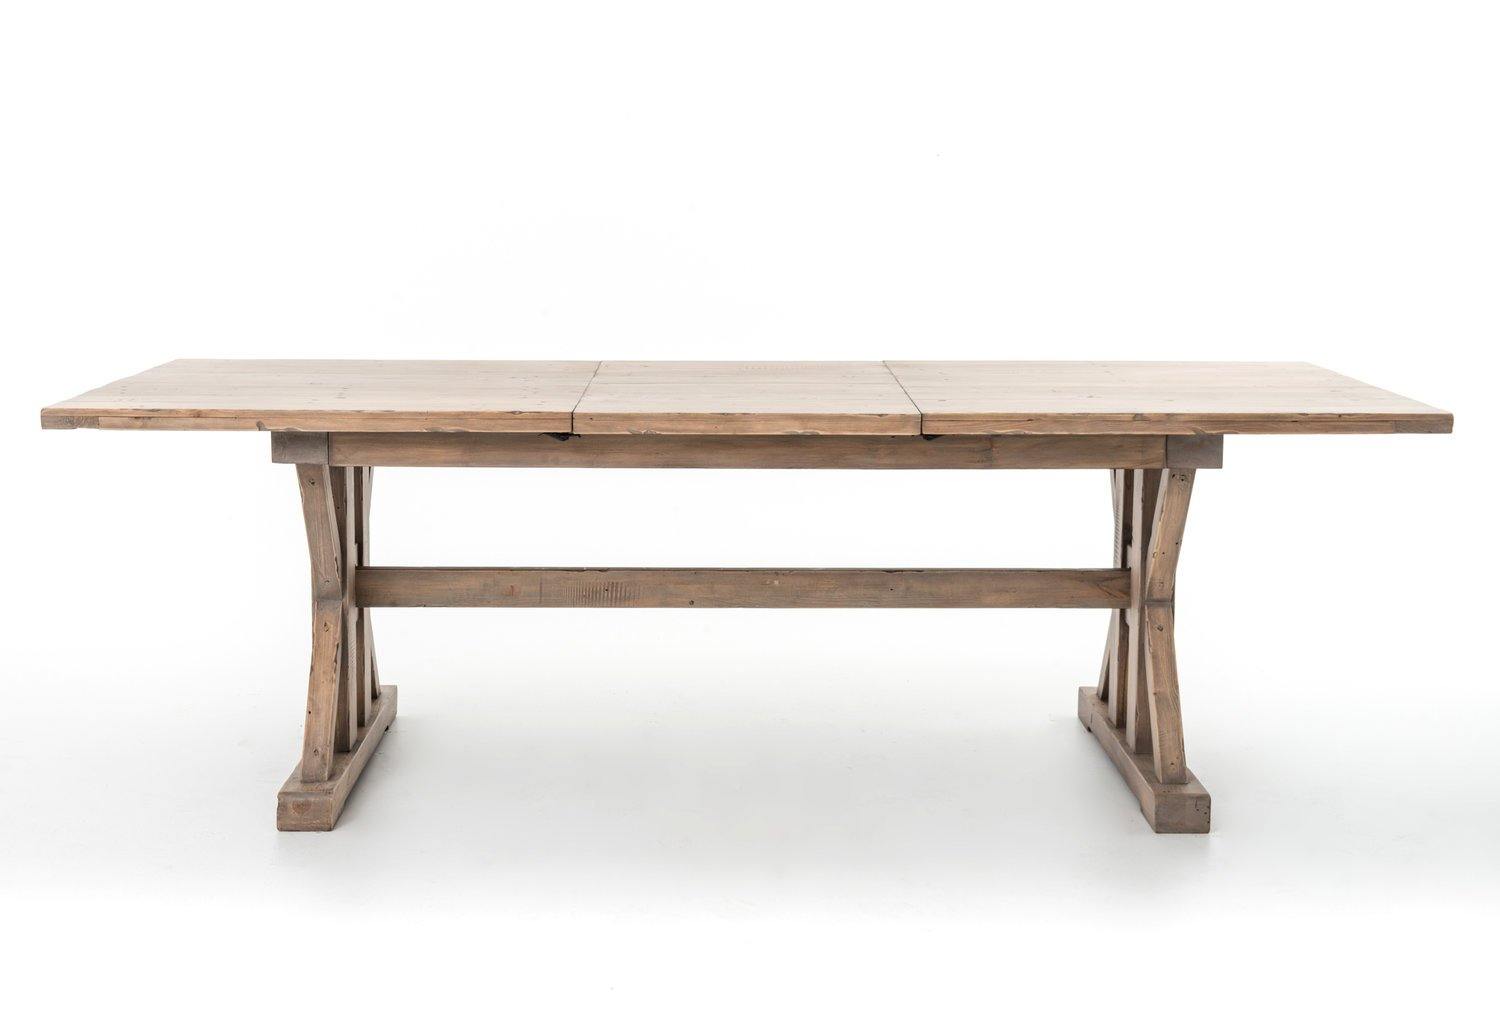 Tuscanspring Farmhouse Dining Table - Reimagine Designs - Tuscanspring Farmhouse Extendable 72/96" Dining Table